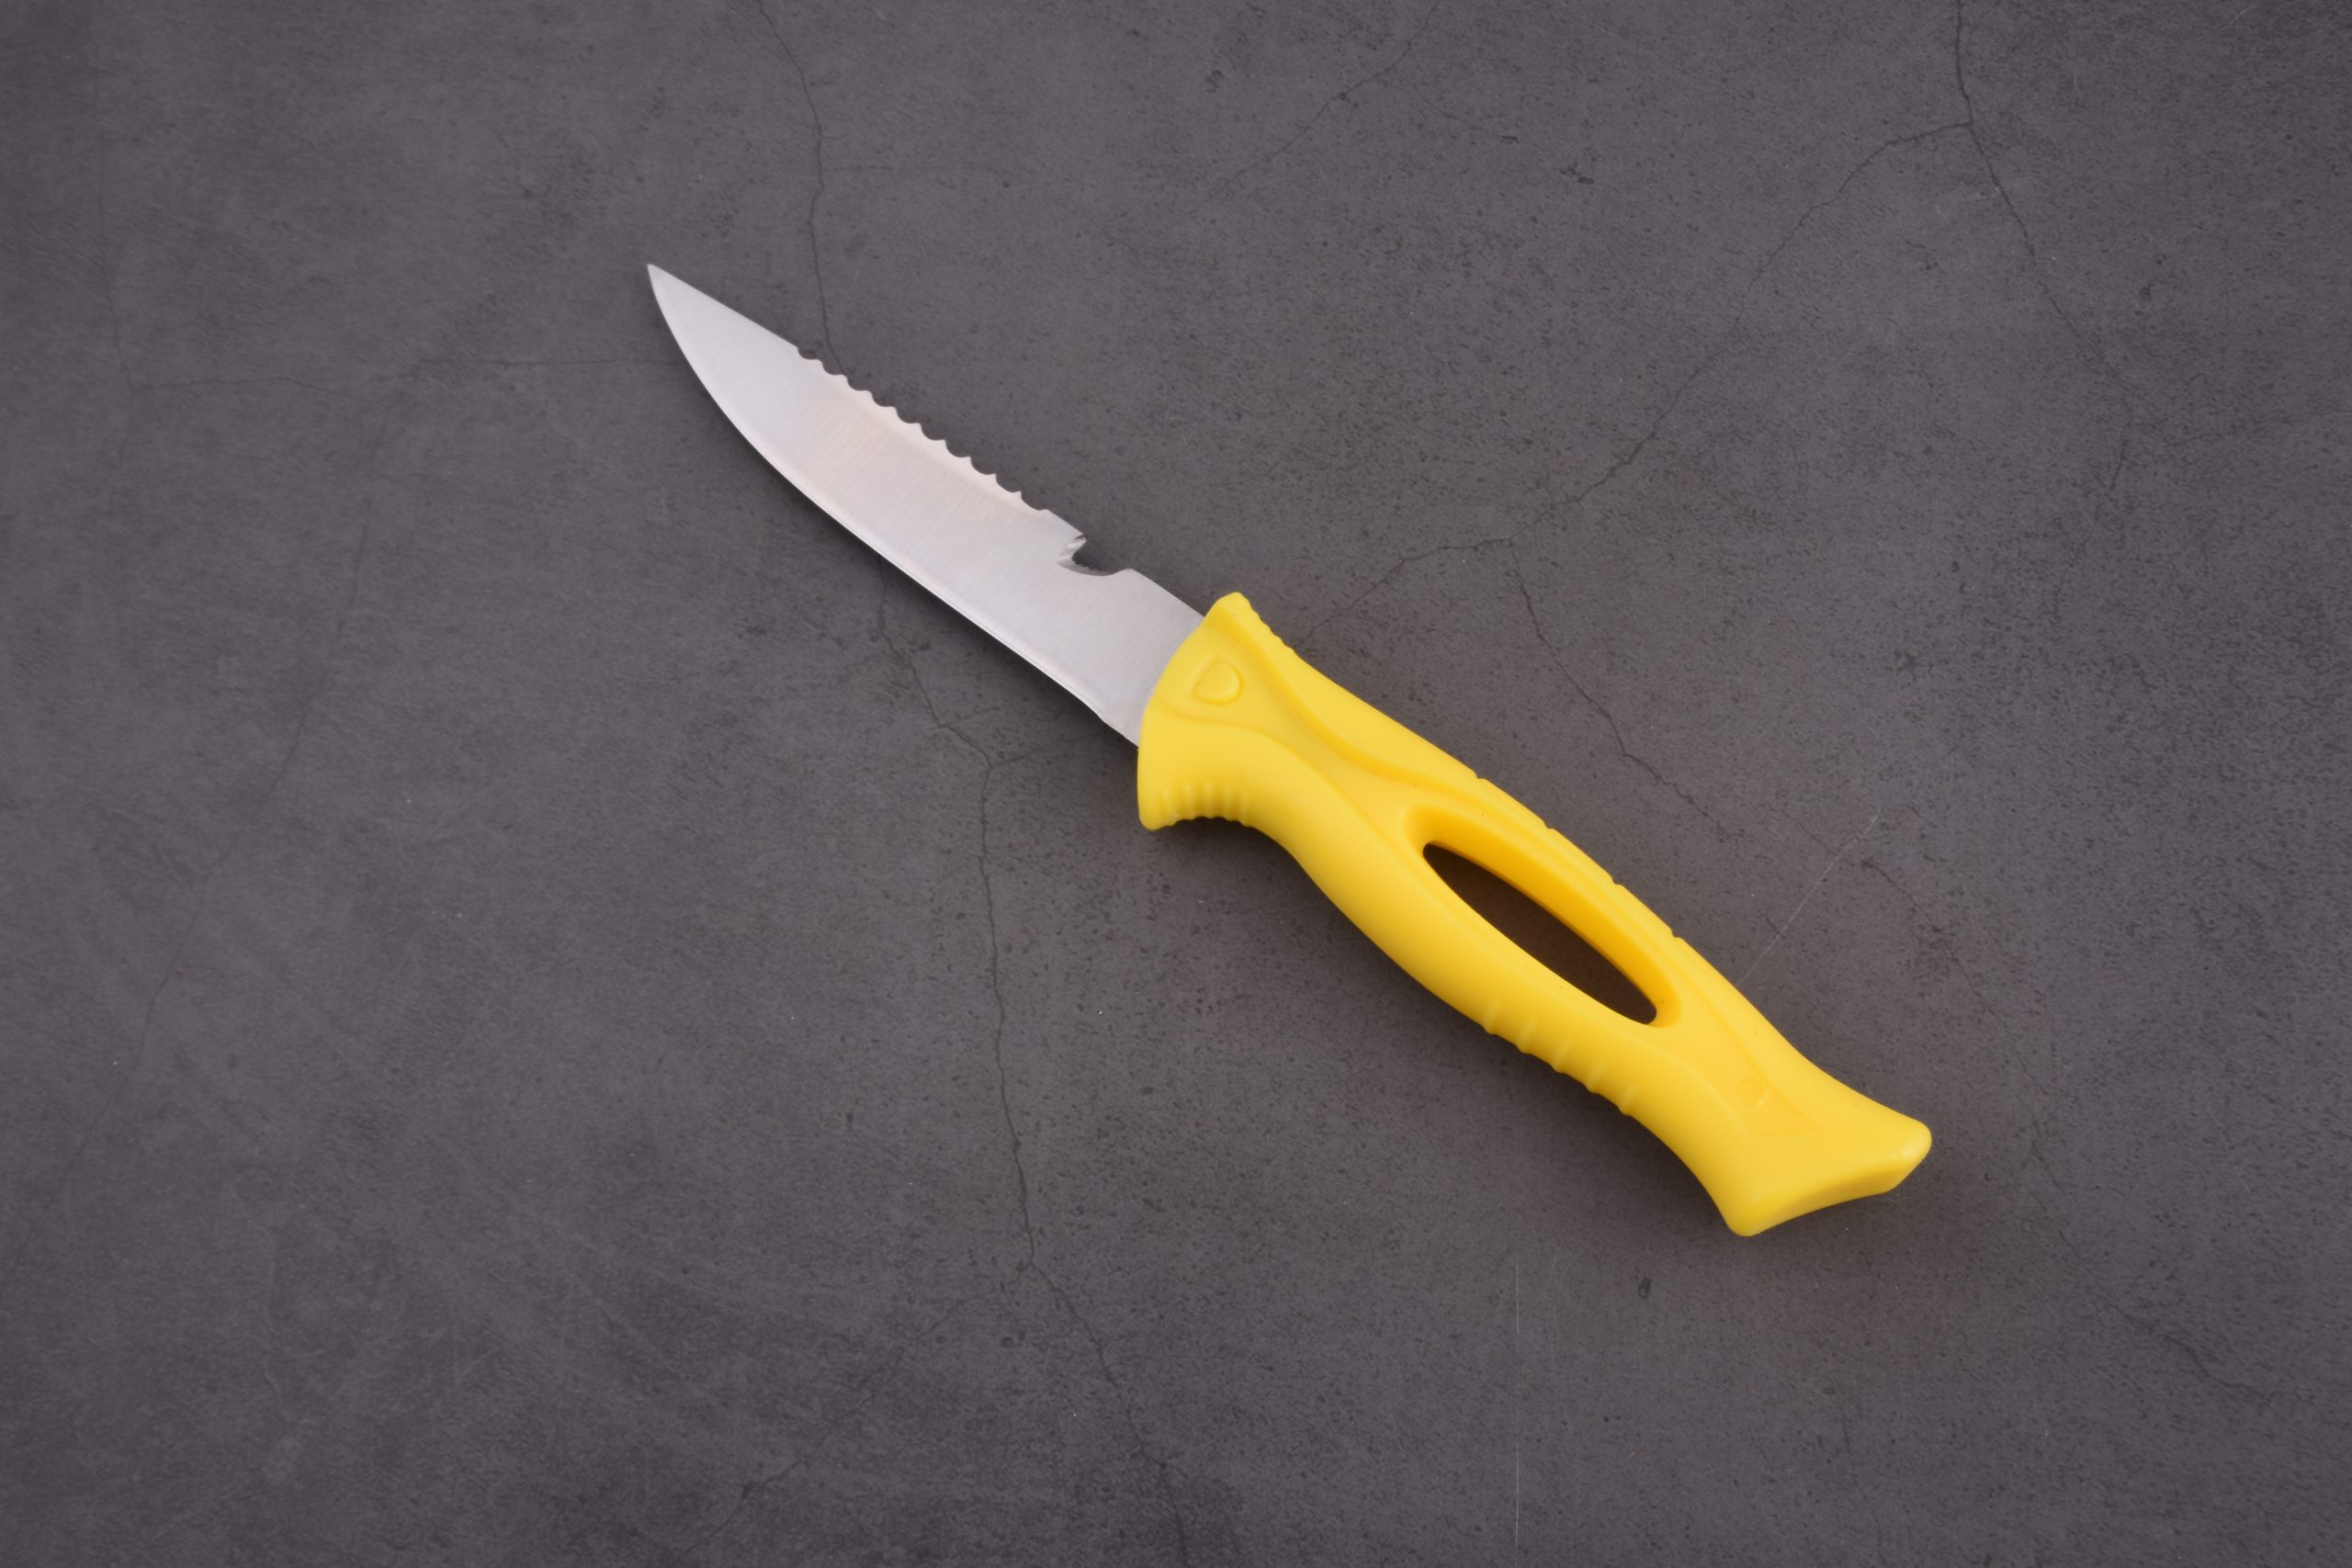 OEM Fixed Fishing Knife 3Cr13 Blade PP Handle with PP sheath yellow FX-22652-A 04